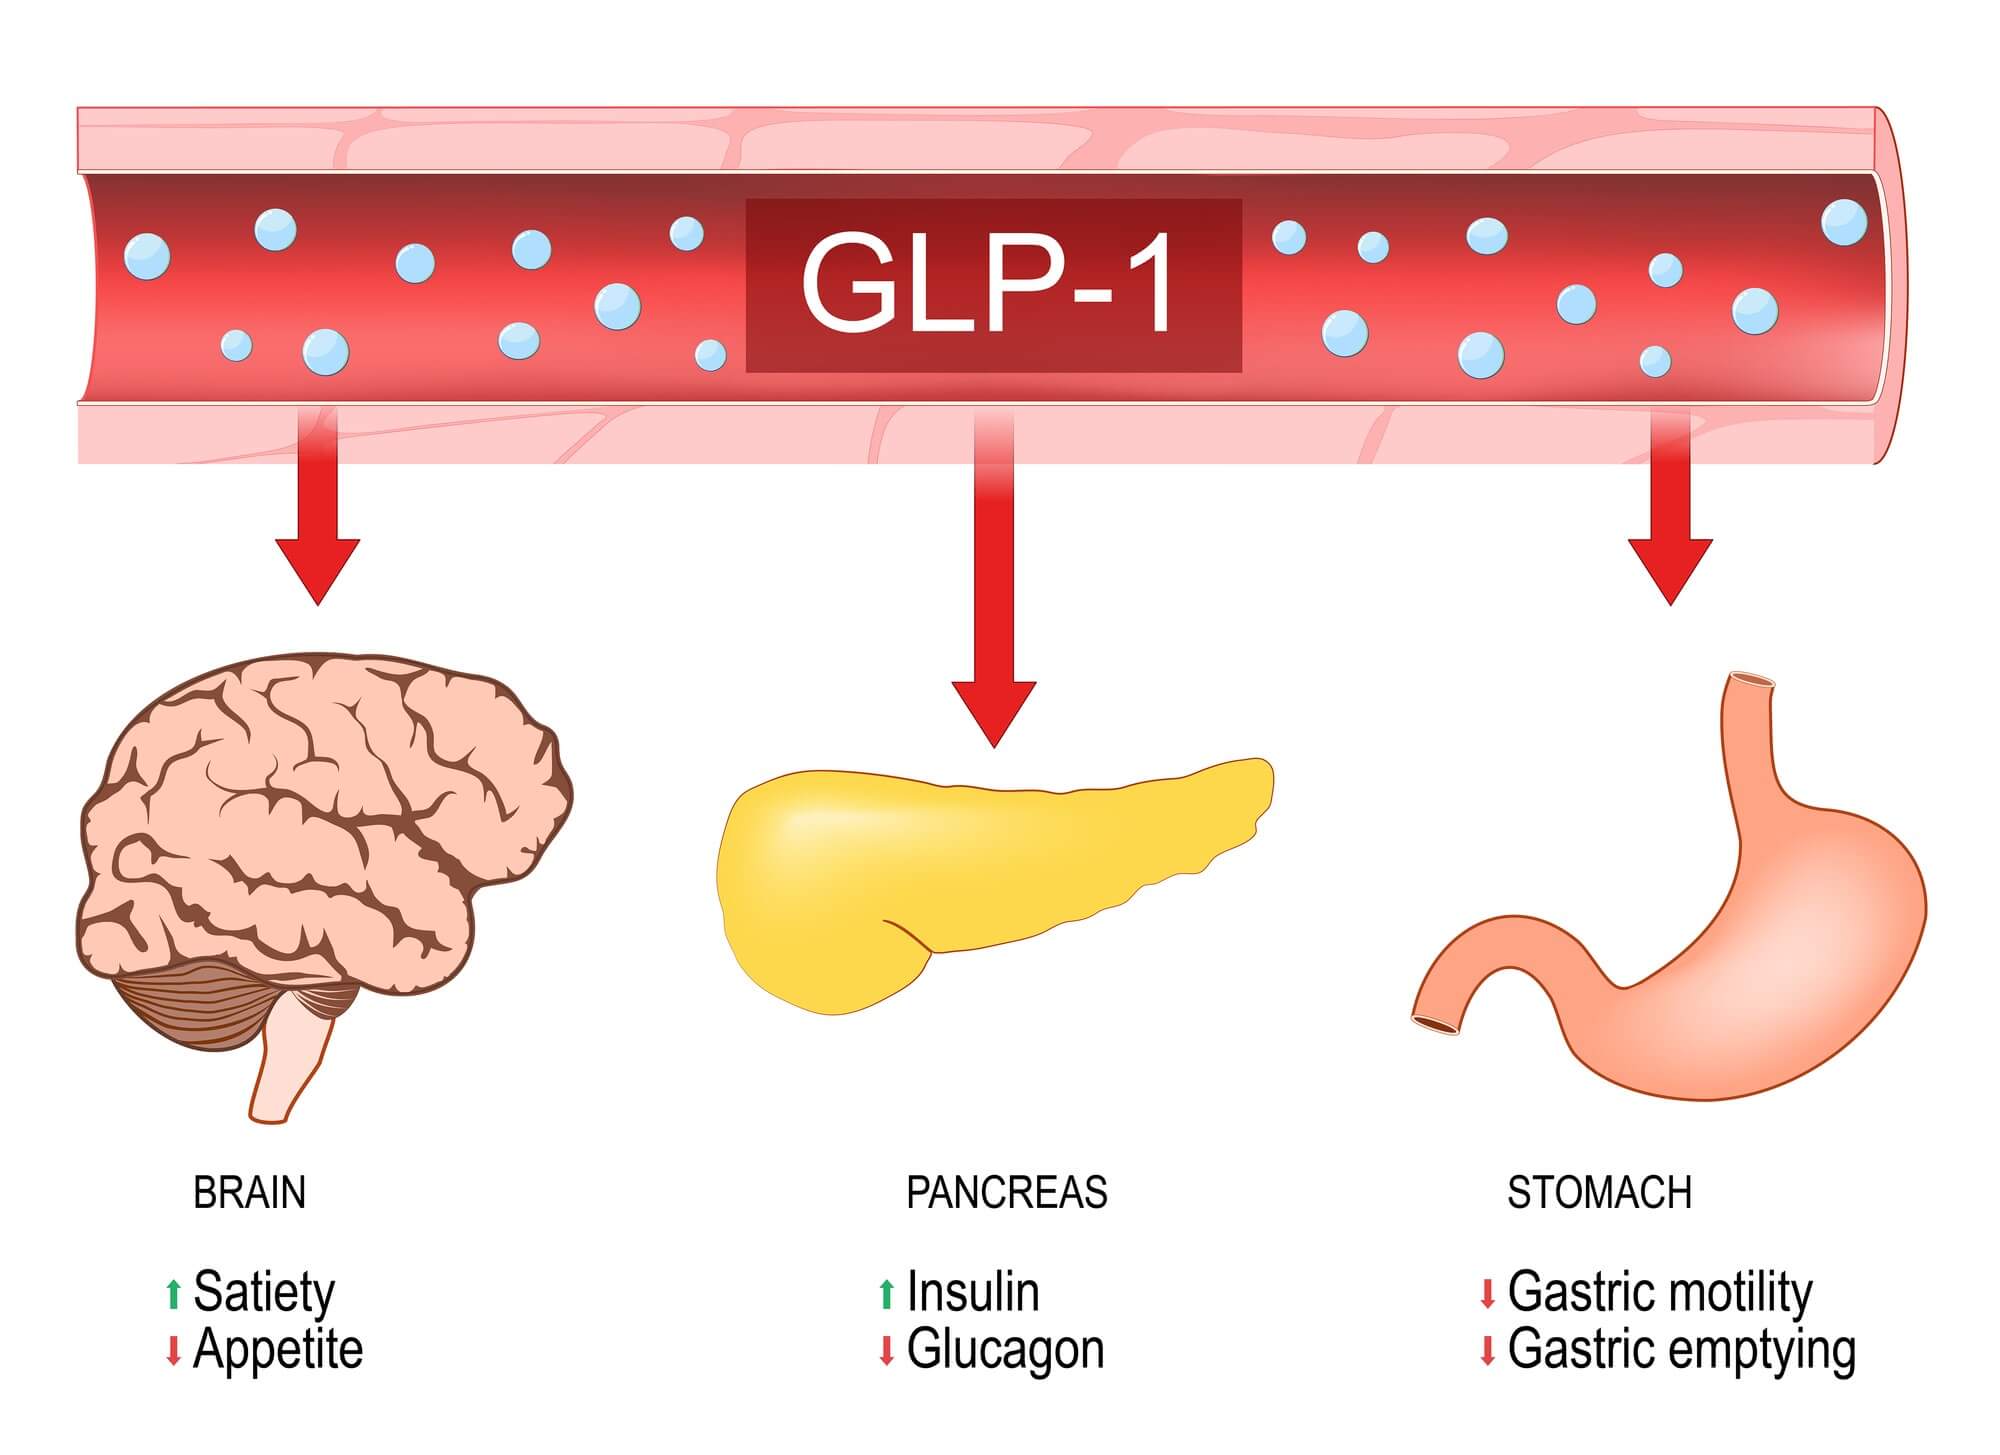 What is GLP-1